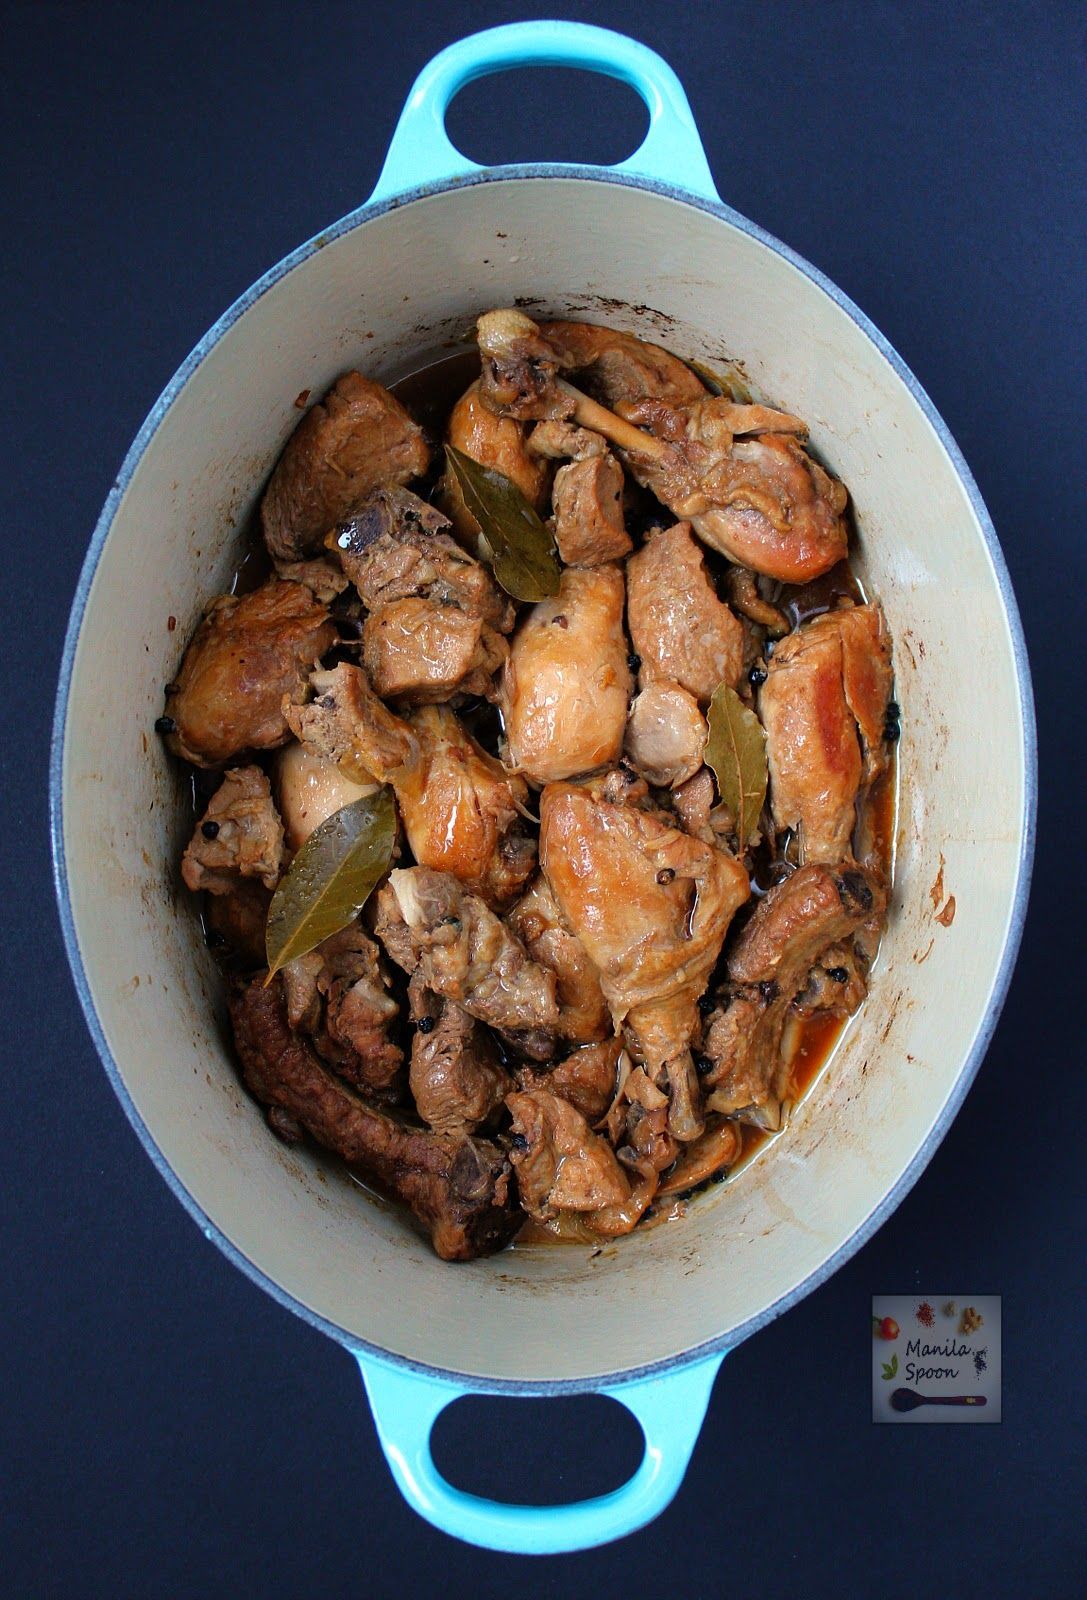 Chicken slowly braised in vinegar, soy sauce, garlic and bay leaves until fall-off-the-bone tender and DEL